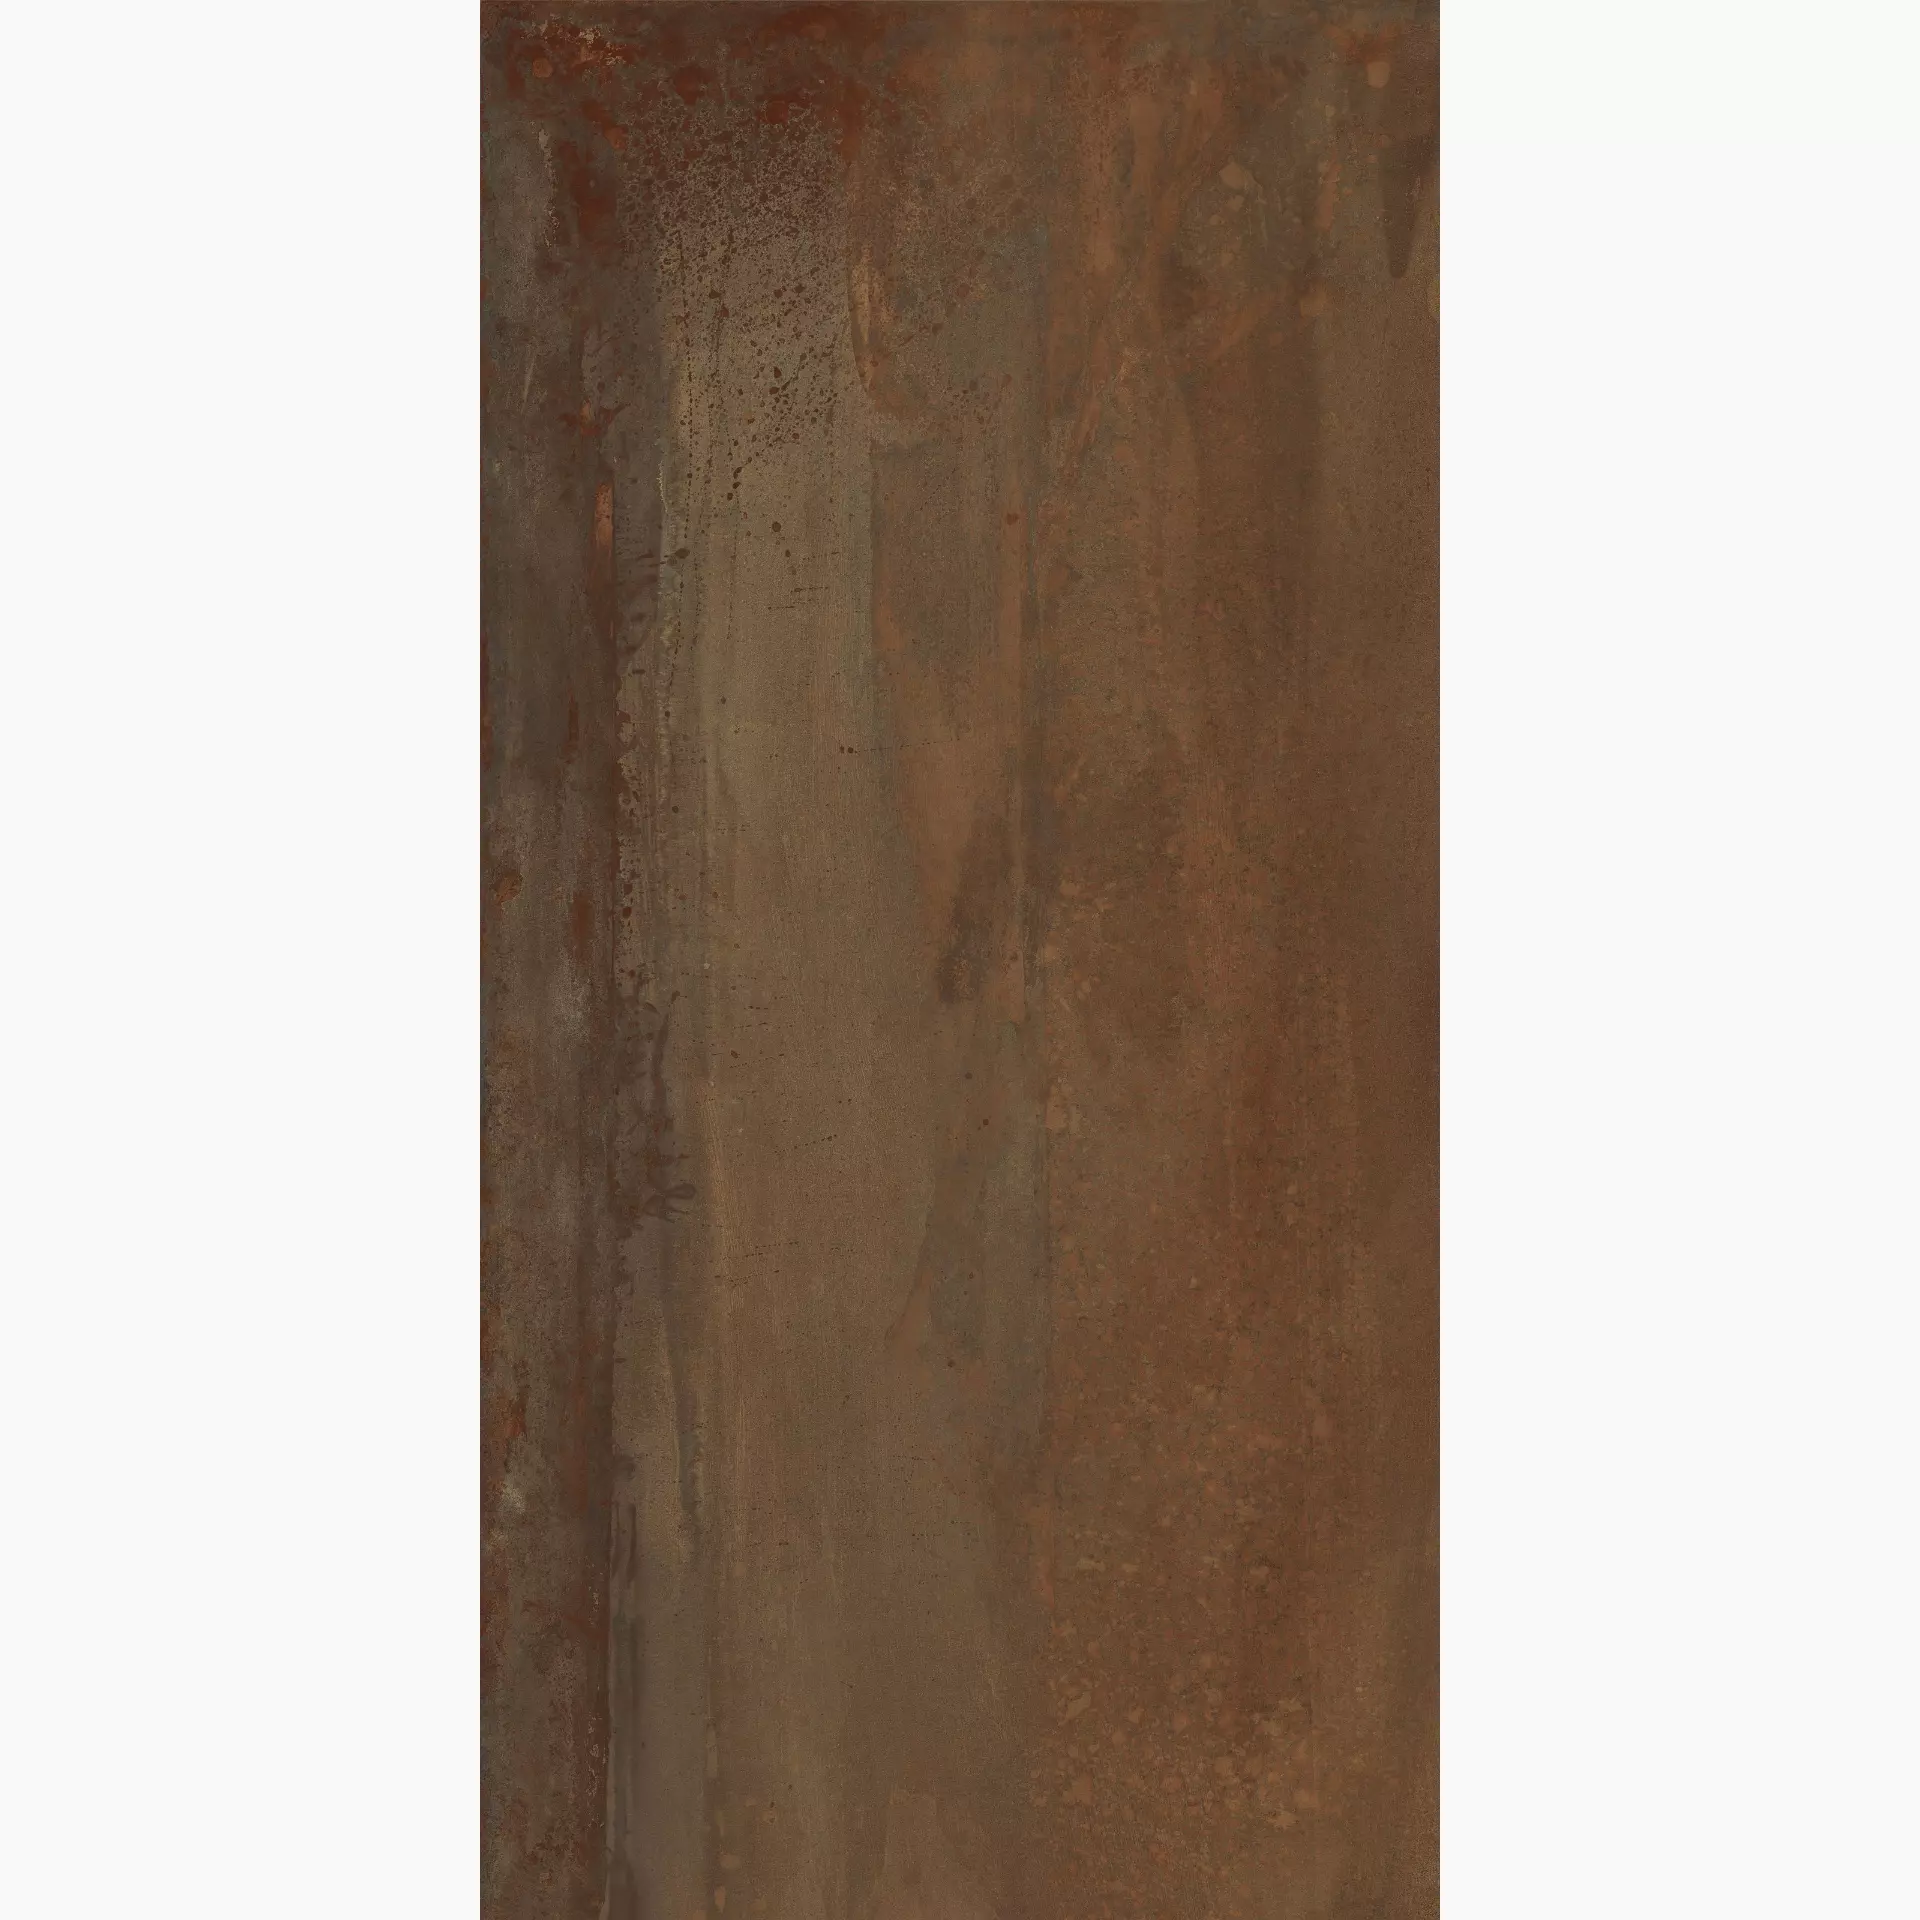 ABK Interno9 Wide Rust Naturale PF60000305 80x160cm rectified 8,5mm